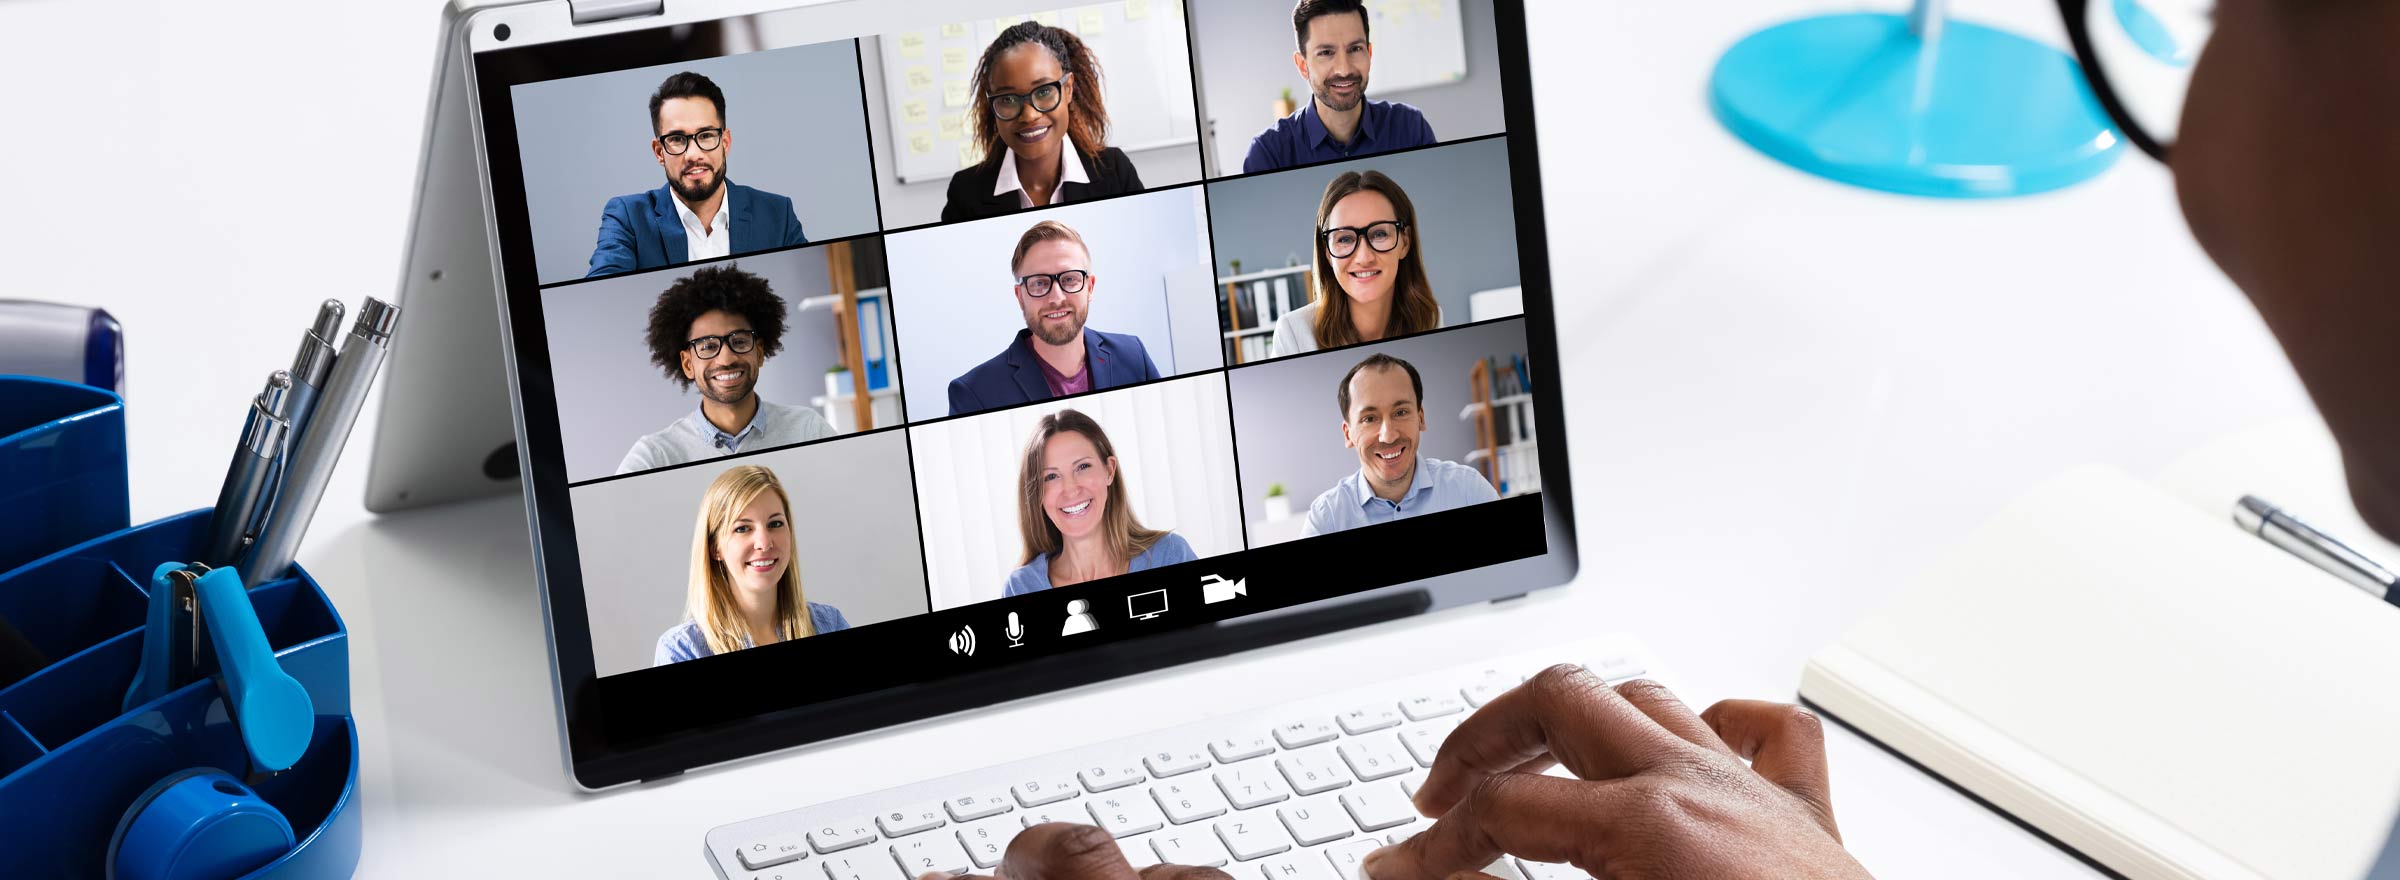 computer screen showing a nine-person video conference